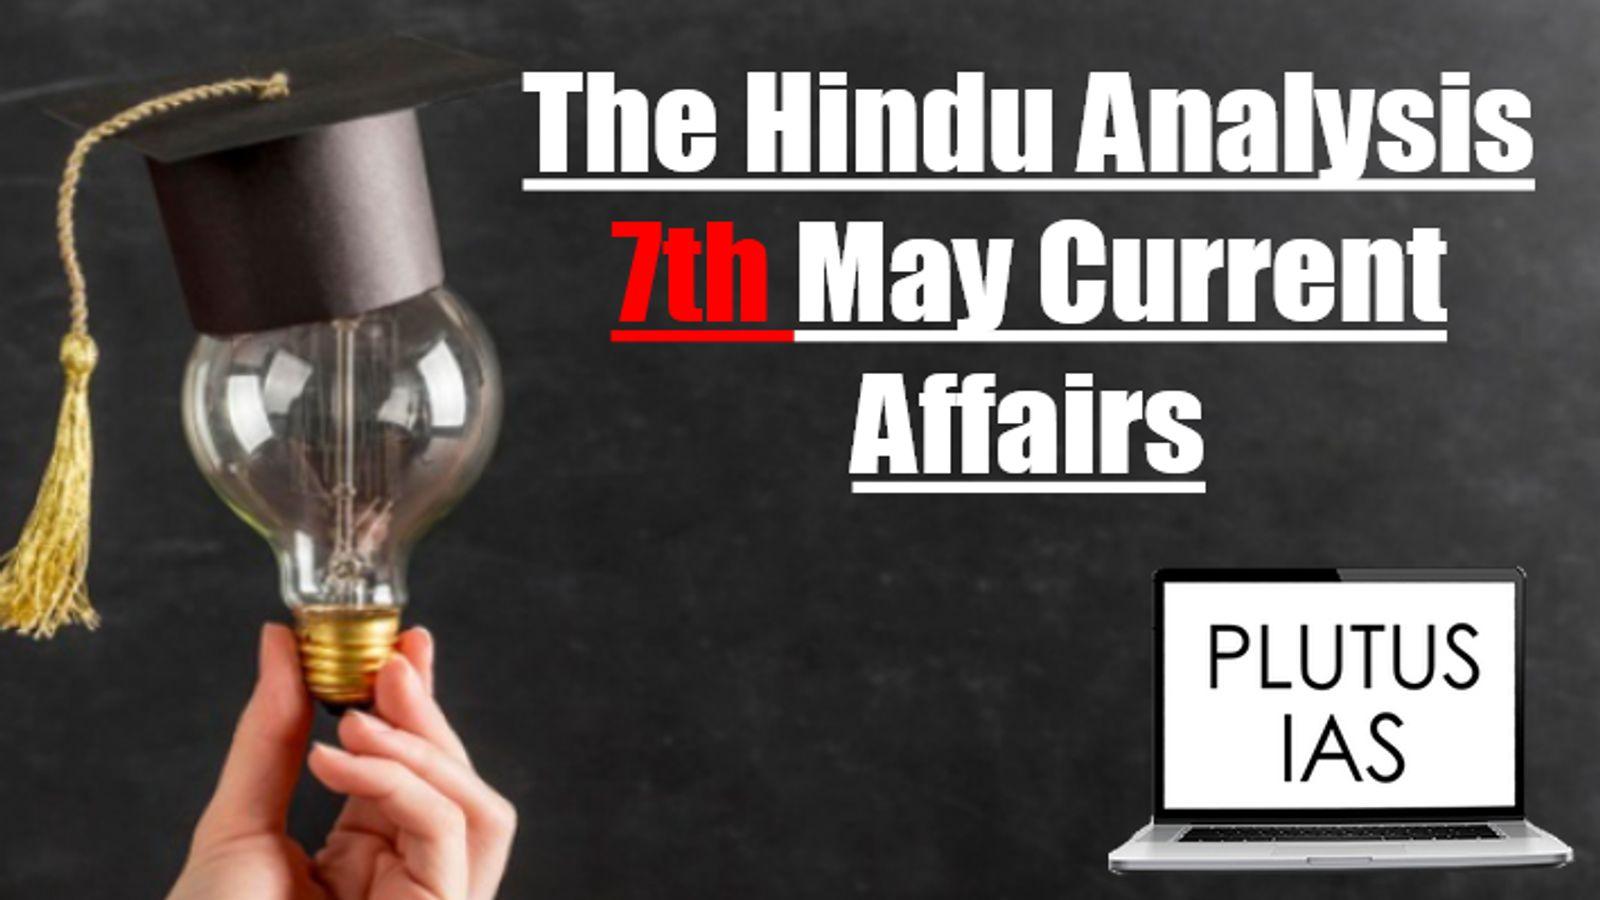 Today Current Affairs 7th May